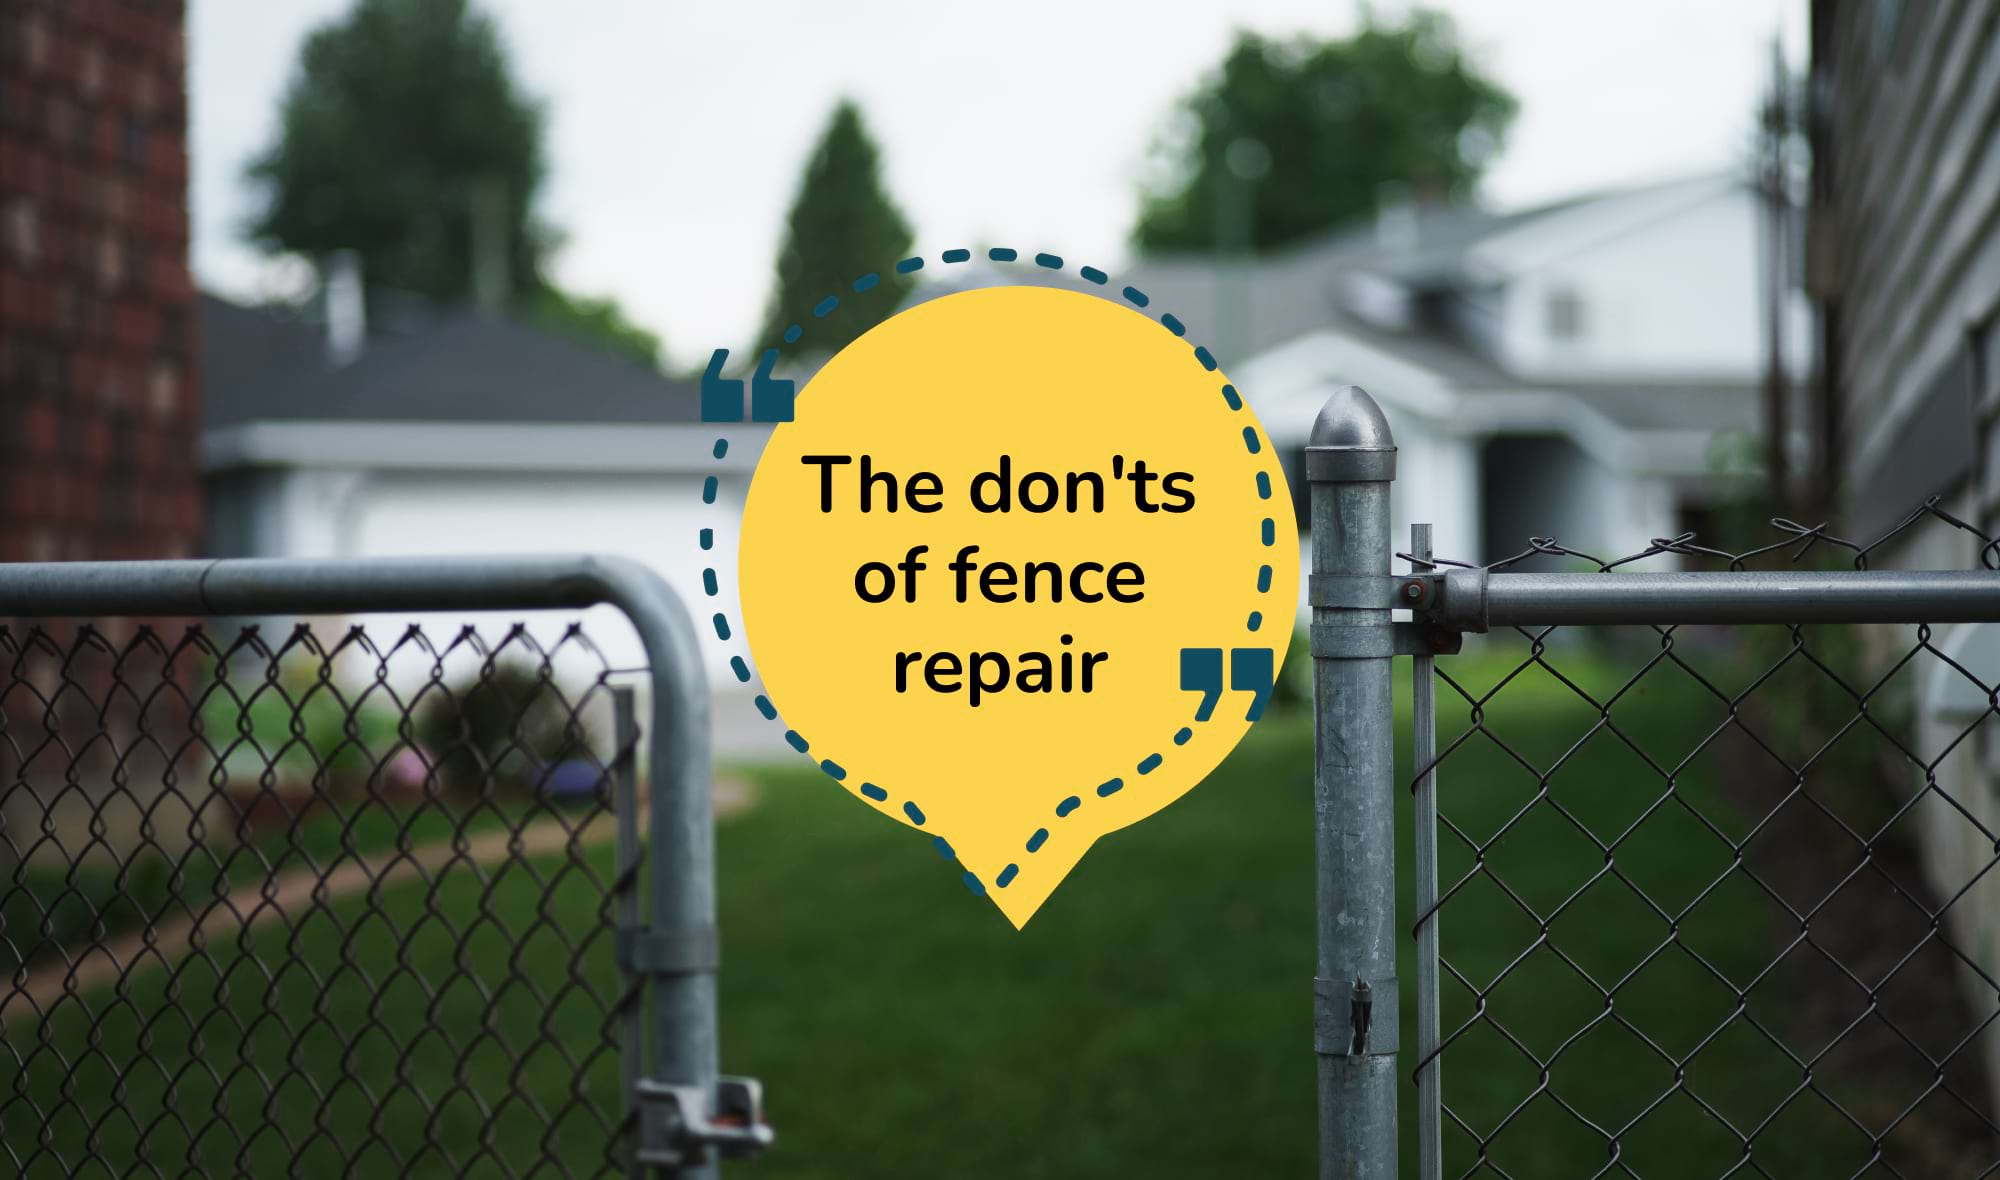 The don'ts of fence repair